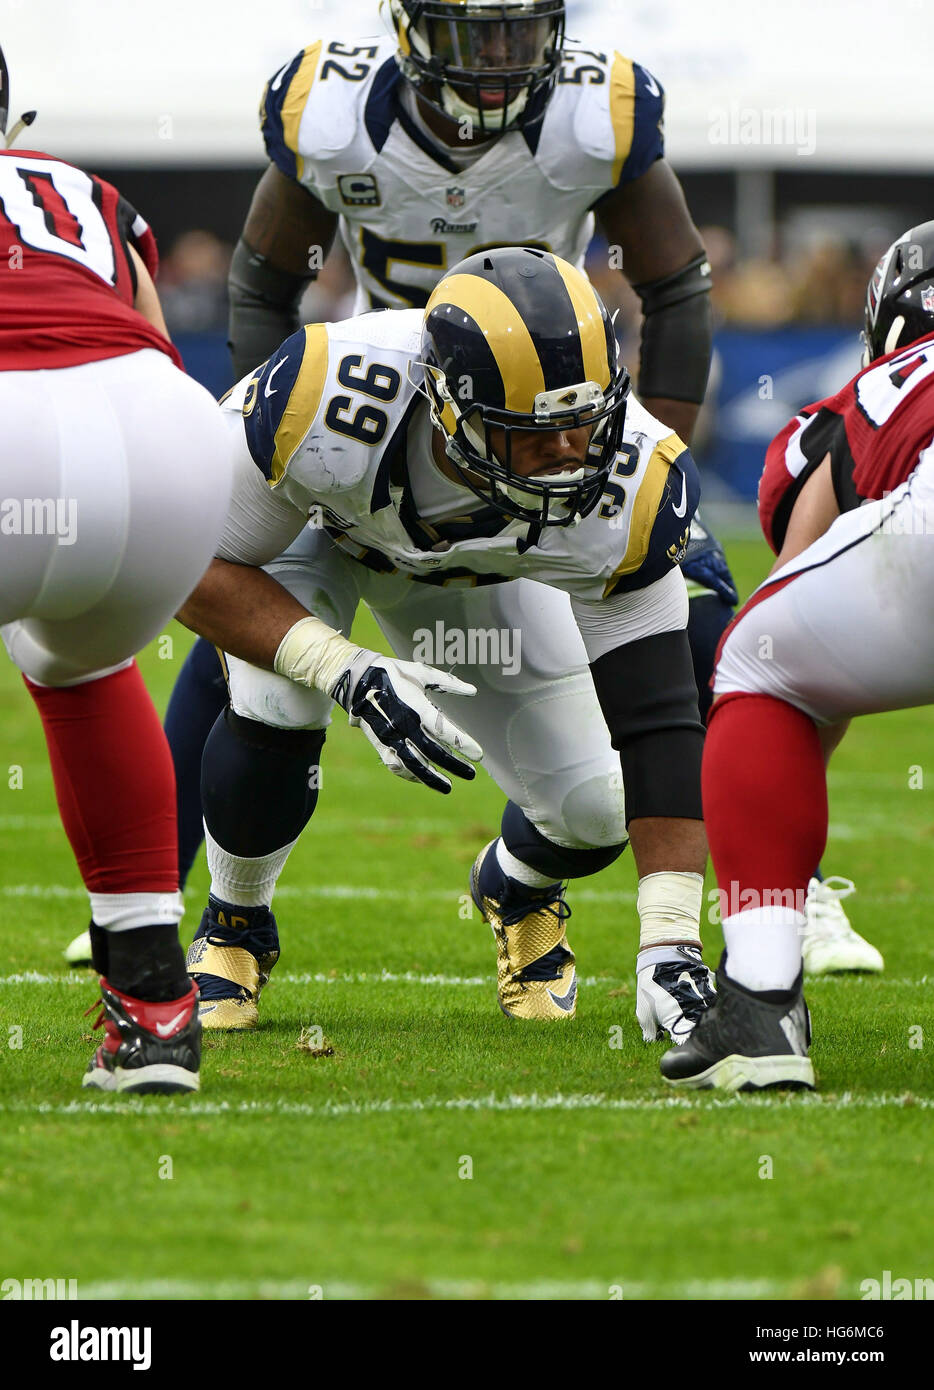 Los Angeles, California, USA. 11th Dec, 2016. Aaron Donald of the Los Angeles Rams in action during a 42-14 loss to the Atlanta Falcons at the Los Angeles Memorial Coliseum in Los Angeles, Ca. © John Pyle/ZUMA Wire/Alamy Live News Stock Photo